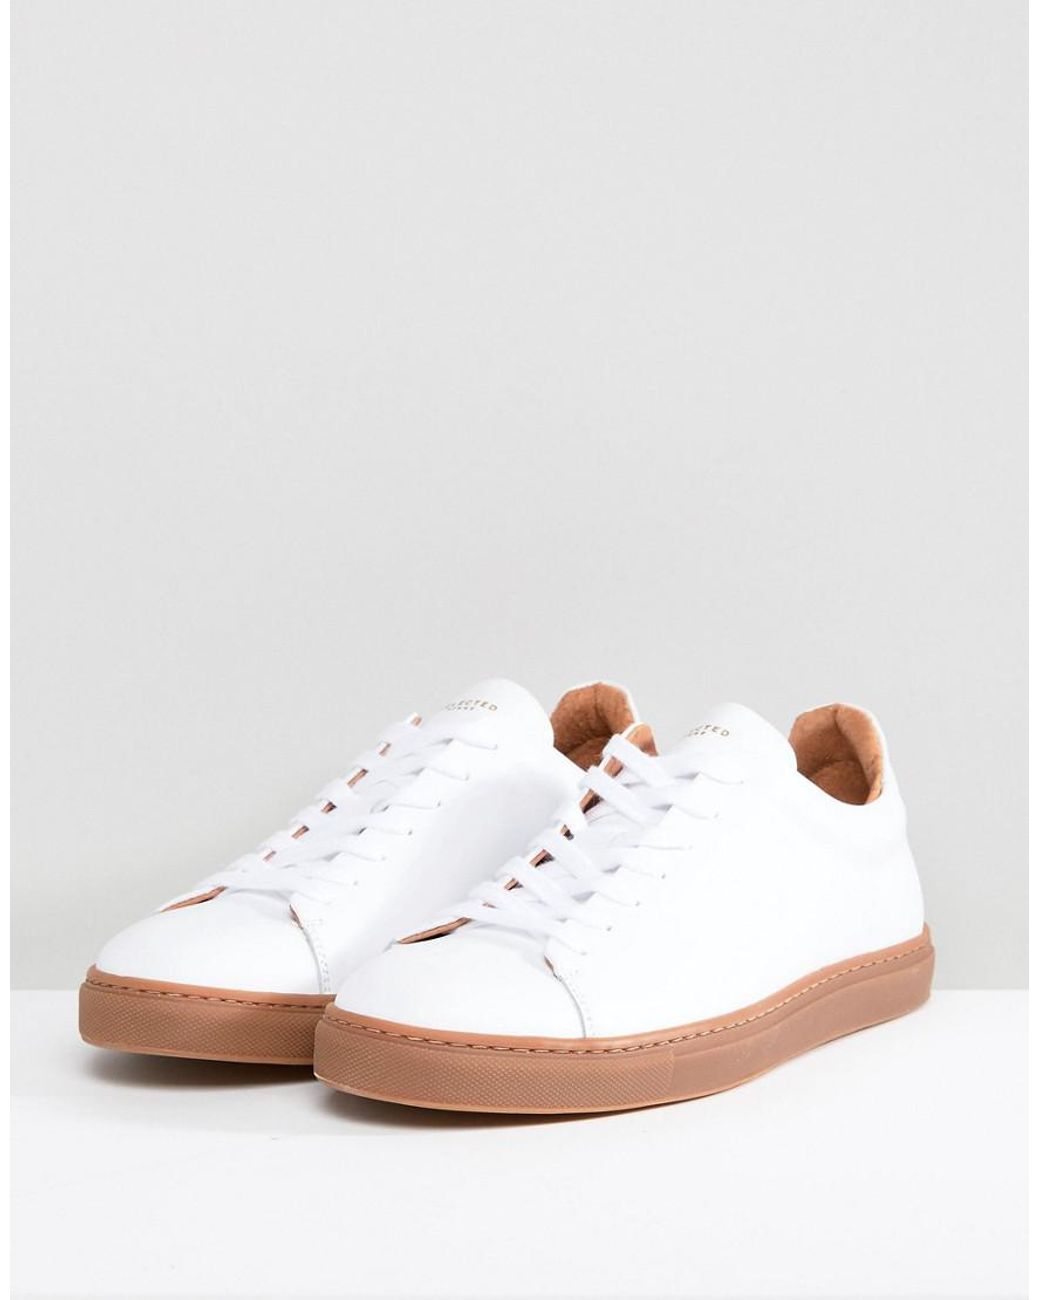 SELECTED Trainers In White Leather With Gum Sole | Lyst